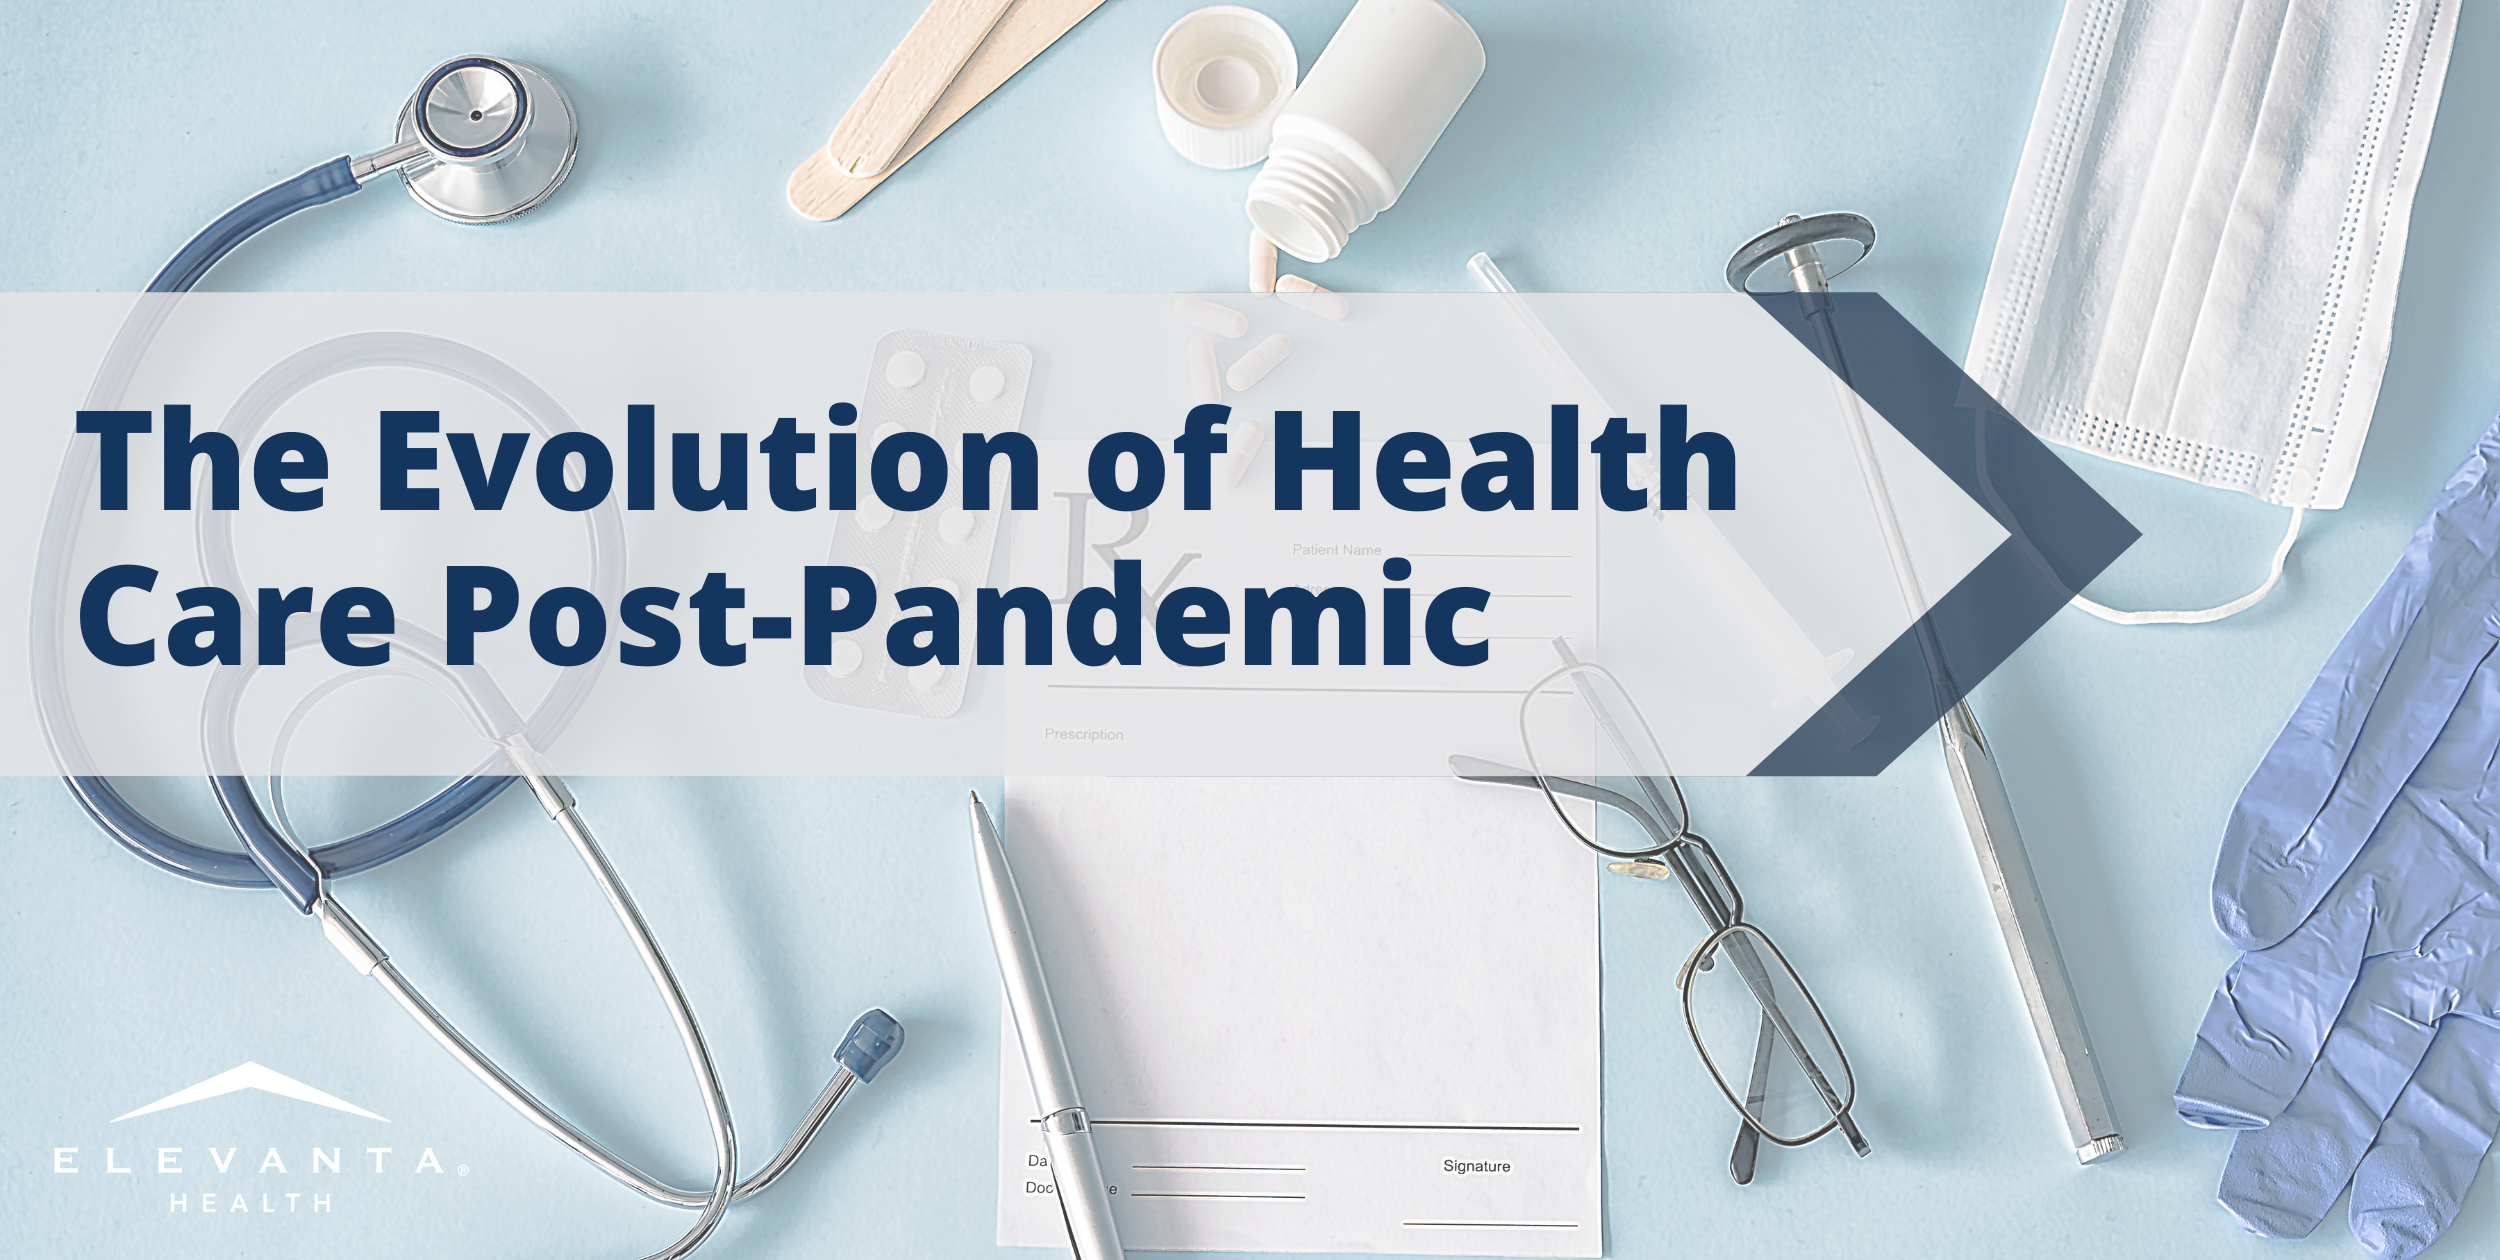 The Evolution of Health Care Post-Pandemic